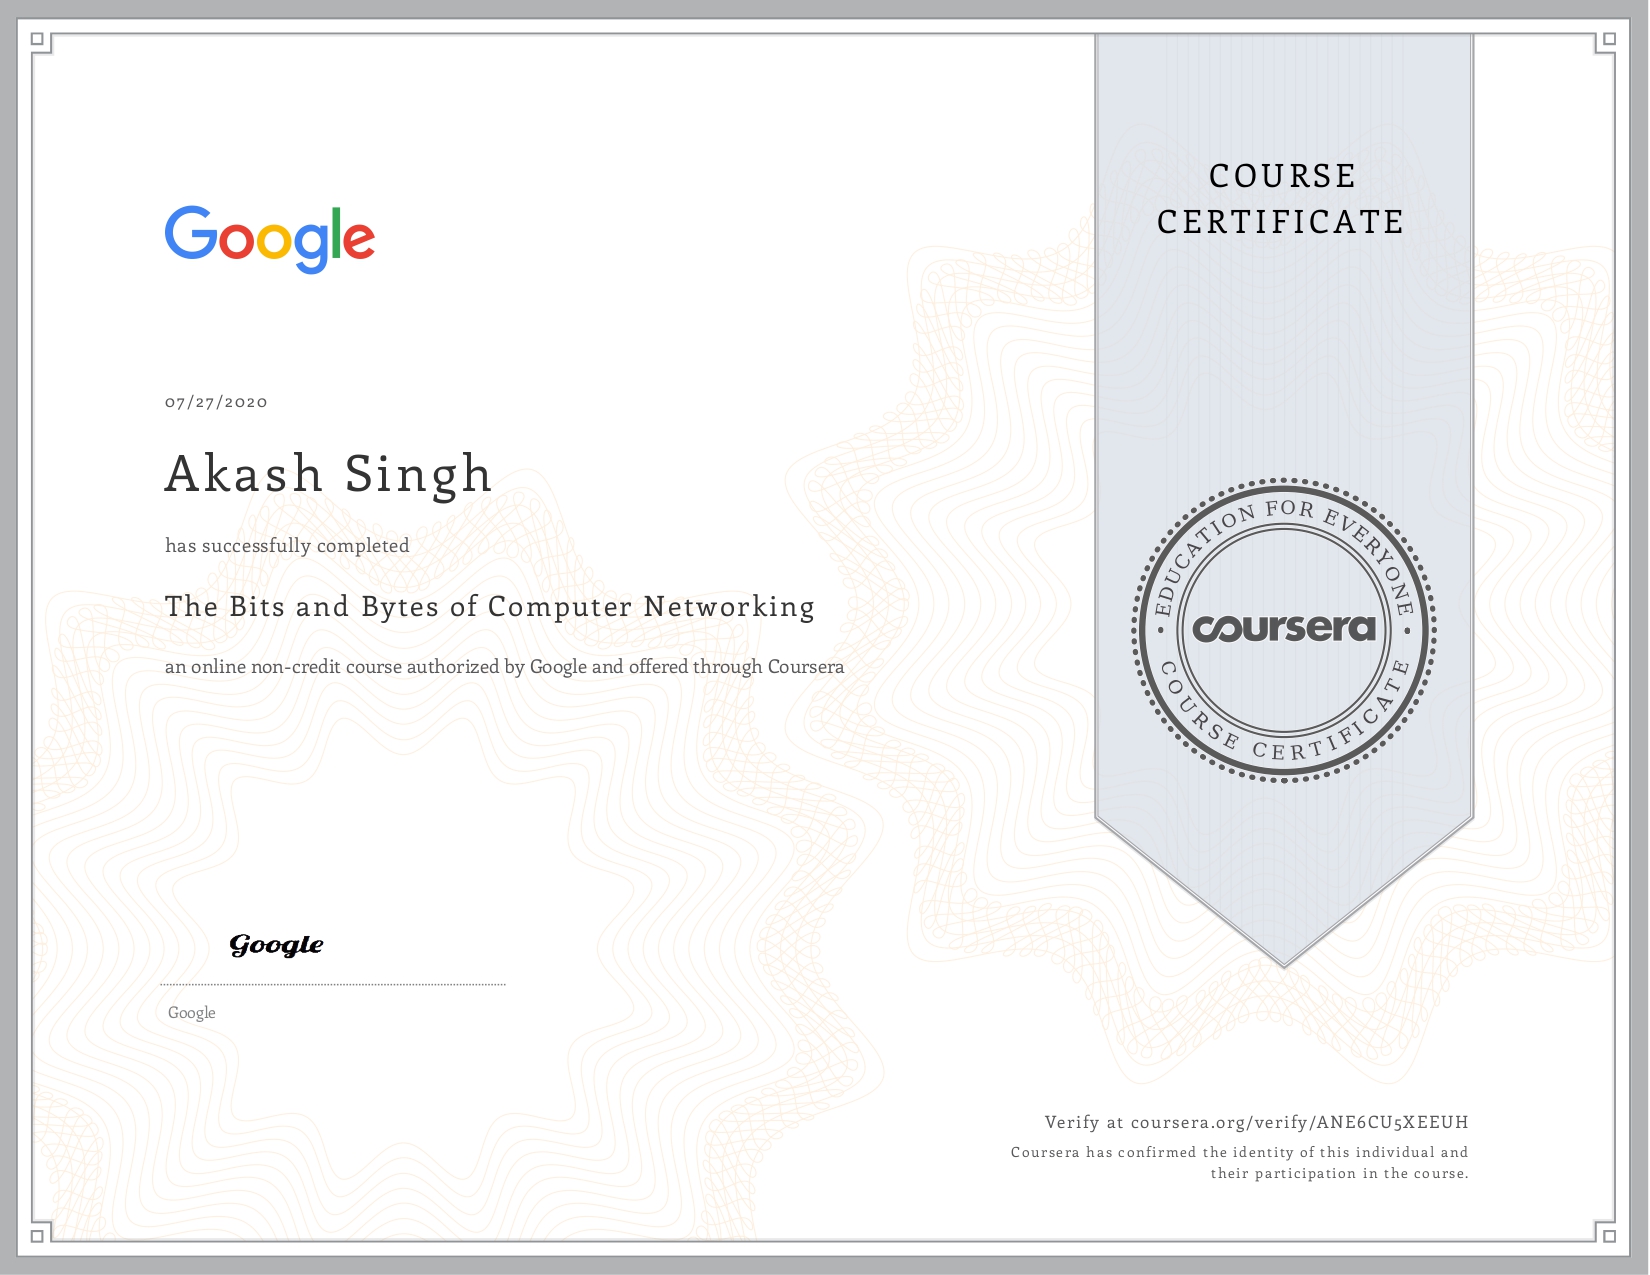 ' Coursera Certifications '_pages-to-jpg-0011.jpg